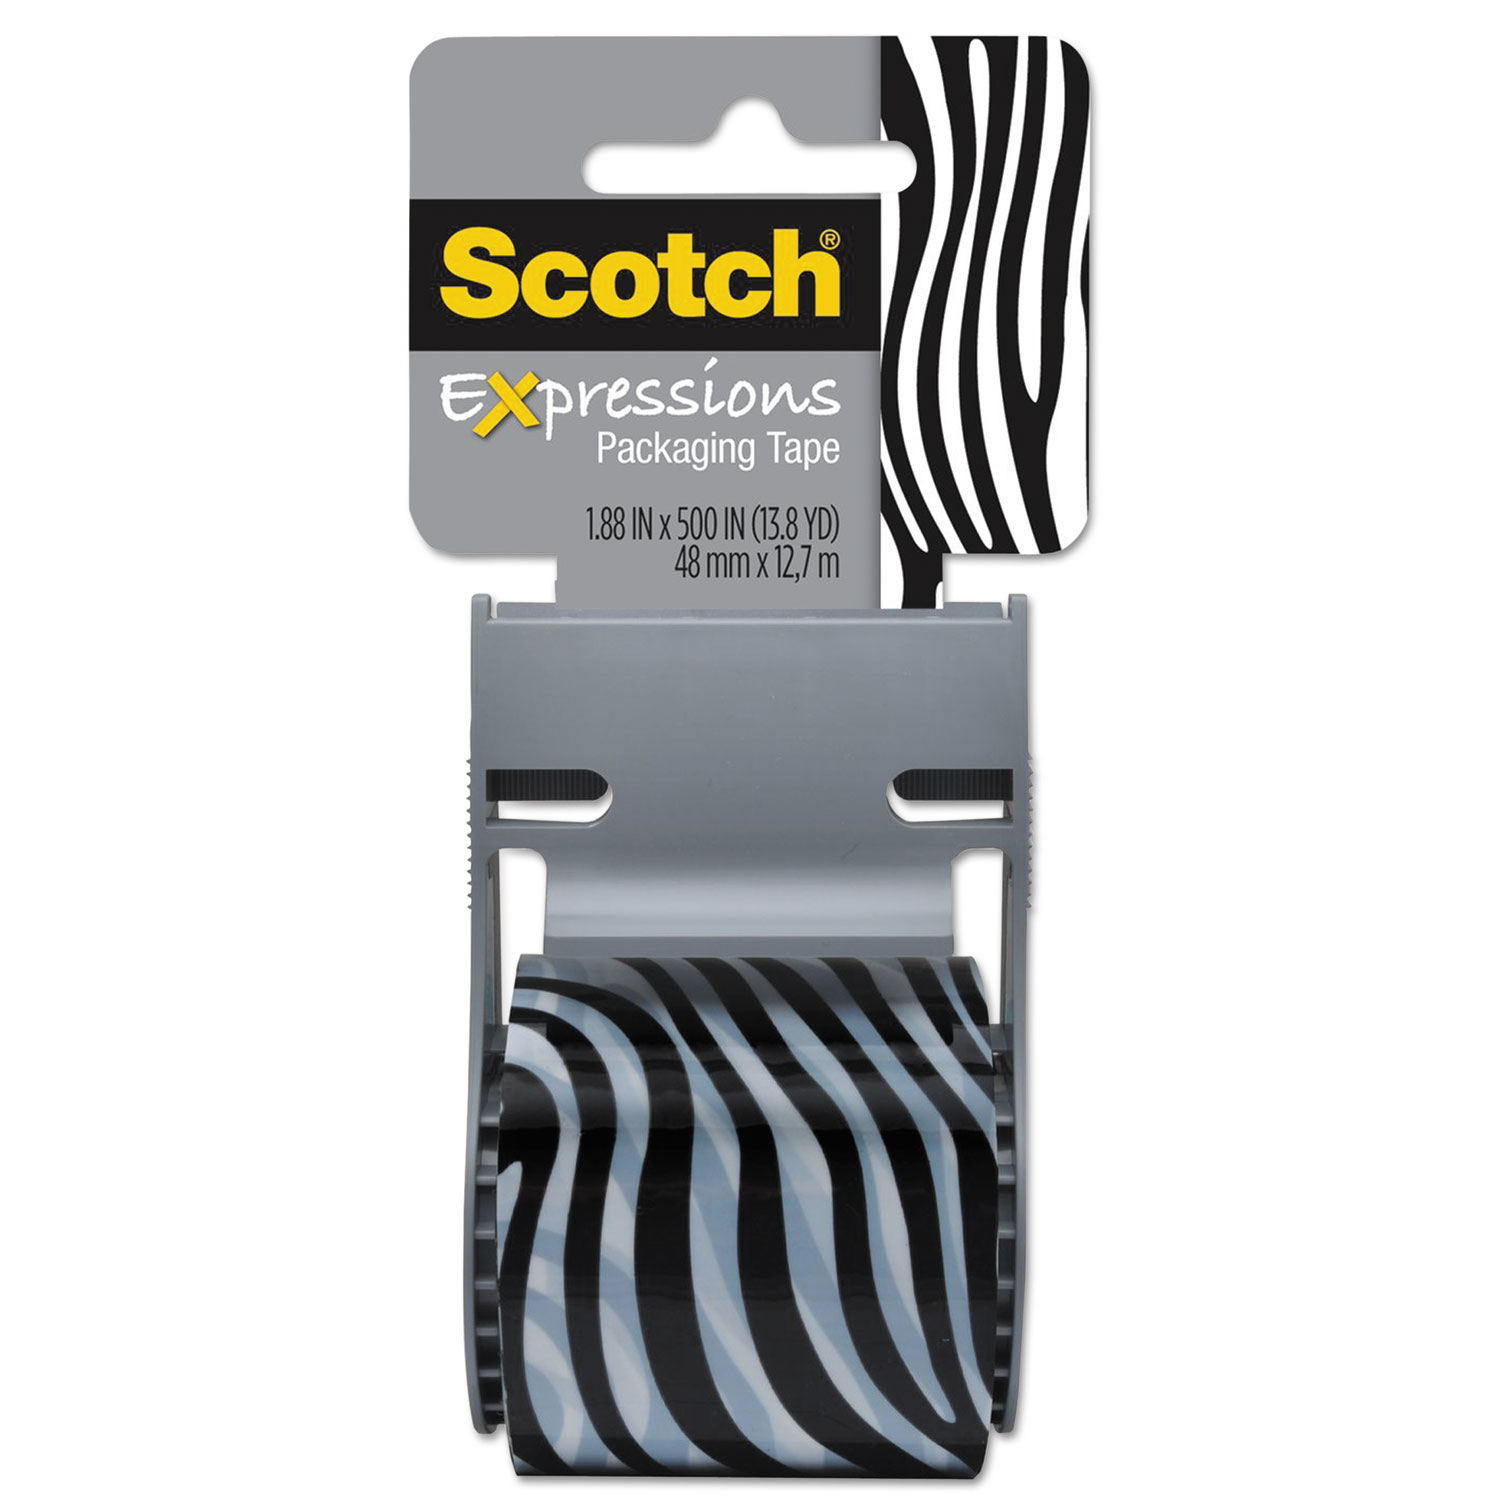 Expressions Packaging Tape, 1.88 x 500, Black/White Zebra Pattern